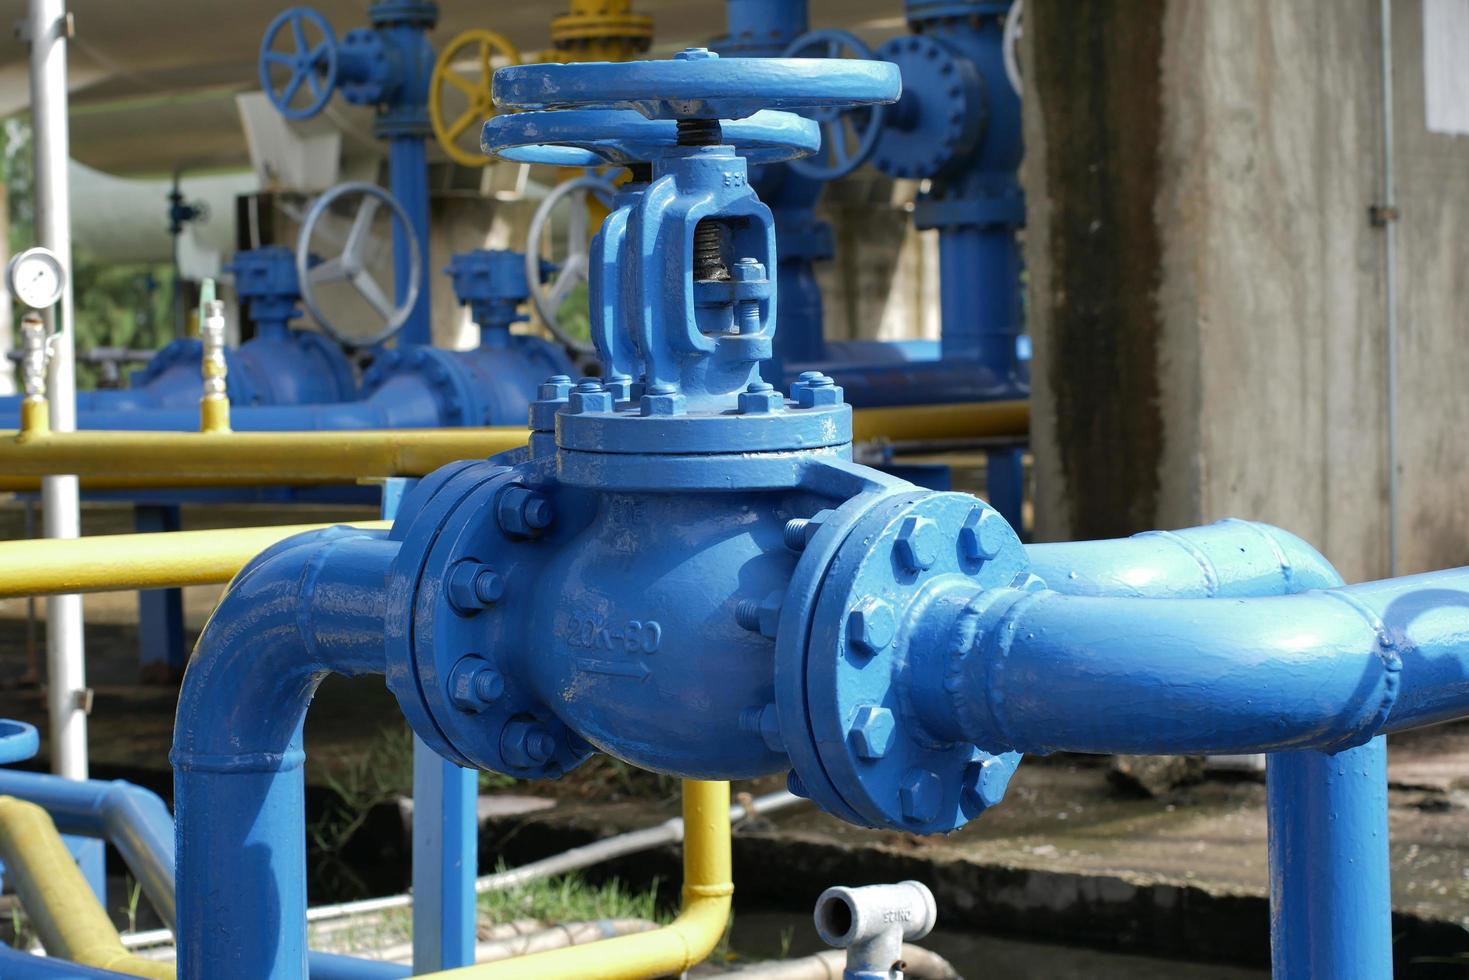 Valves at gas plant Pressure safety valve to protect piping system from over pressure photo